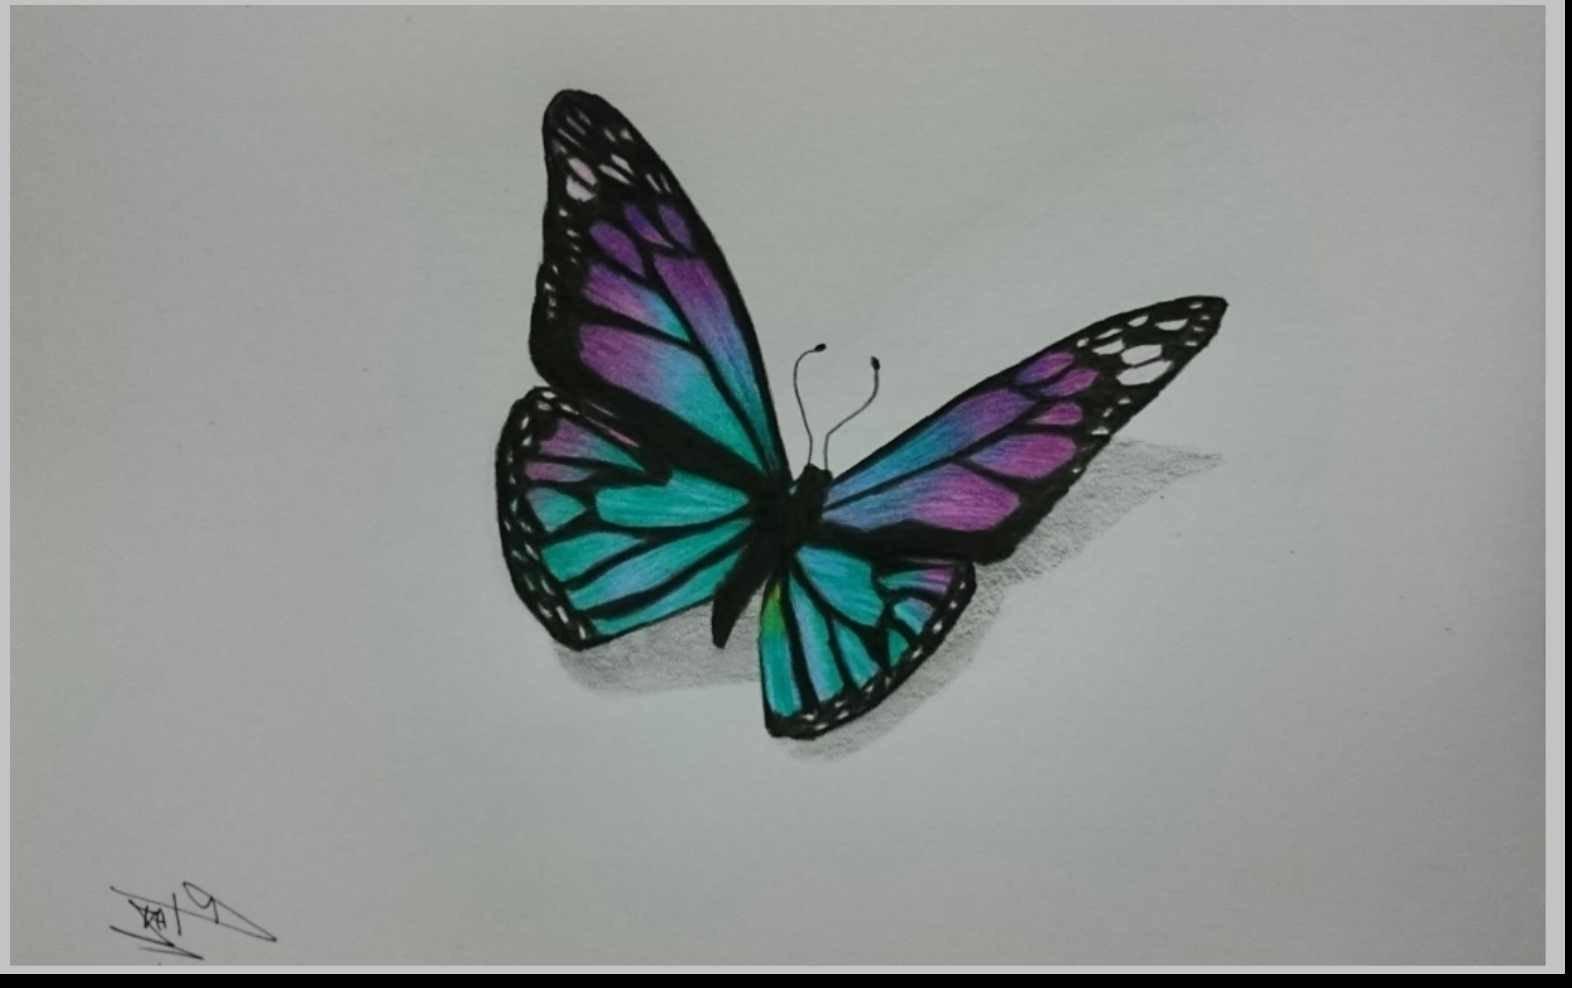 Drawn butterfly colour pencil Pencil and in color drawn